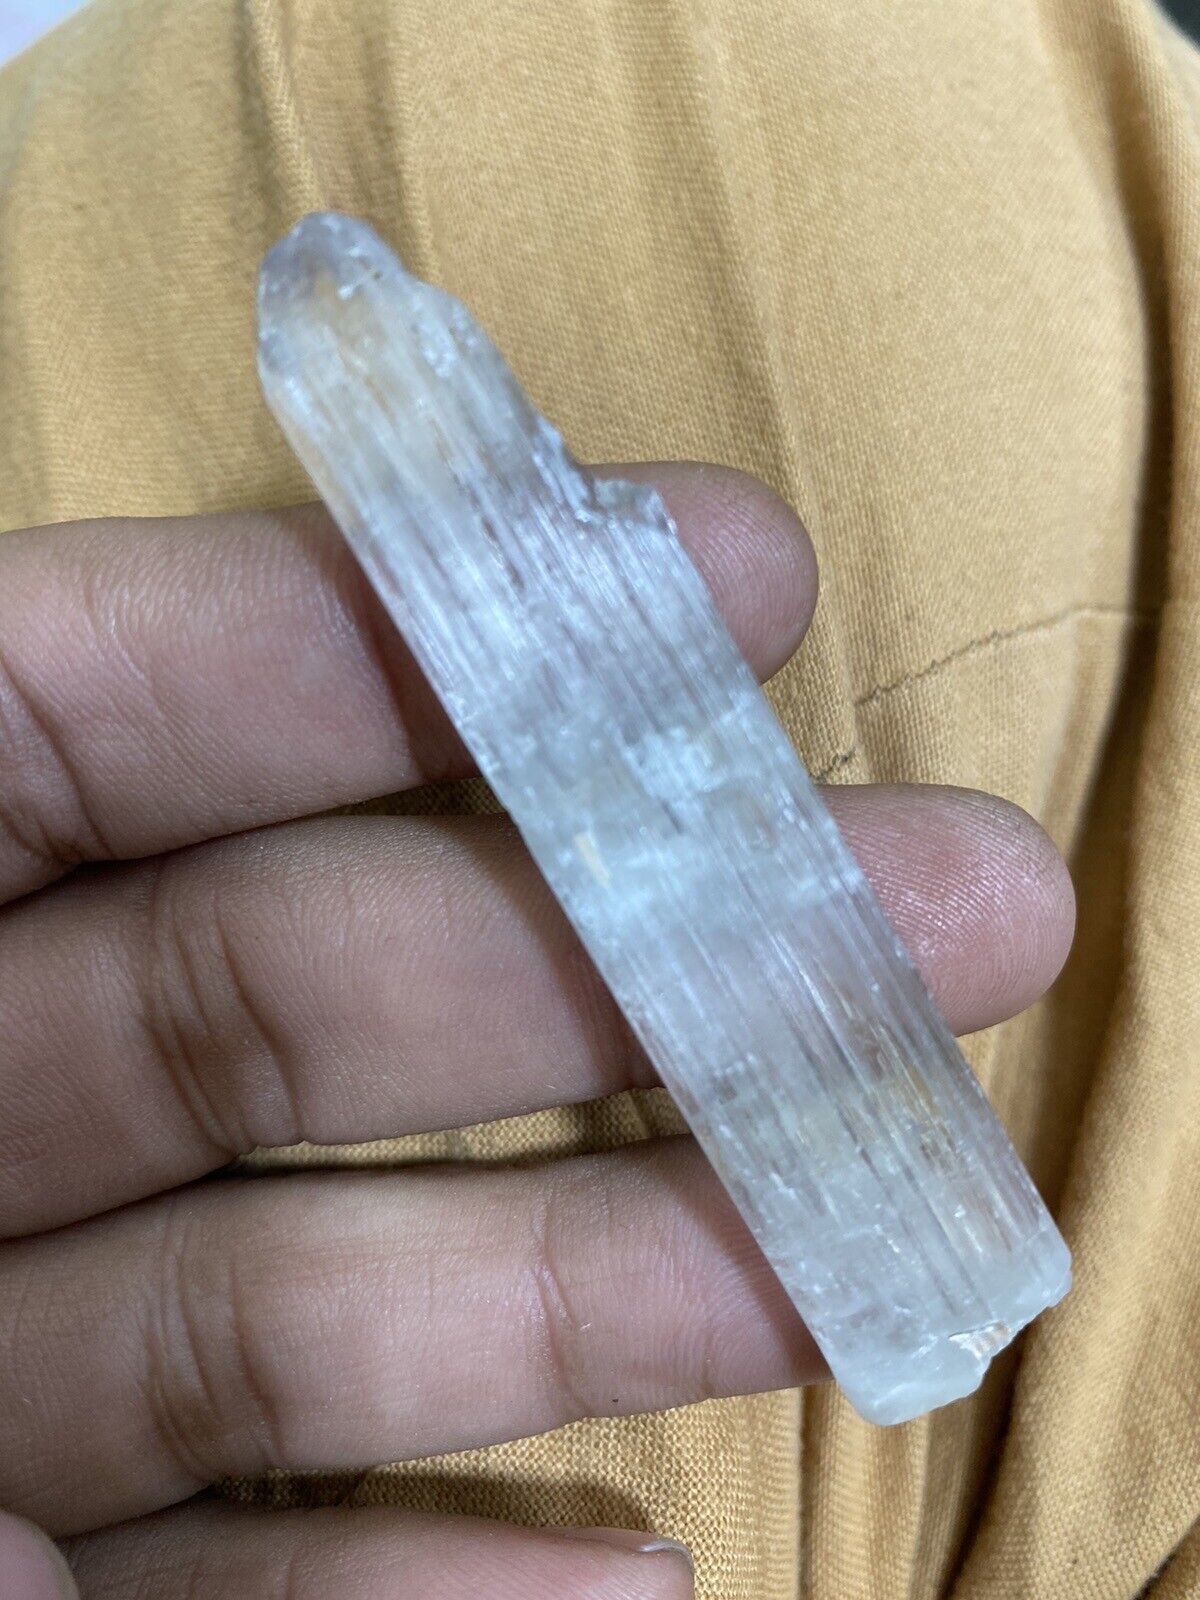 88 Crt Natural Kunzite Crystal From Afghanistan